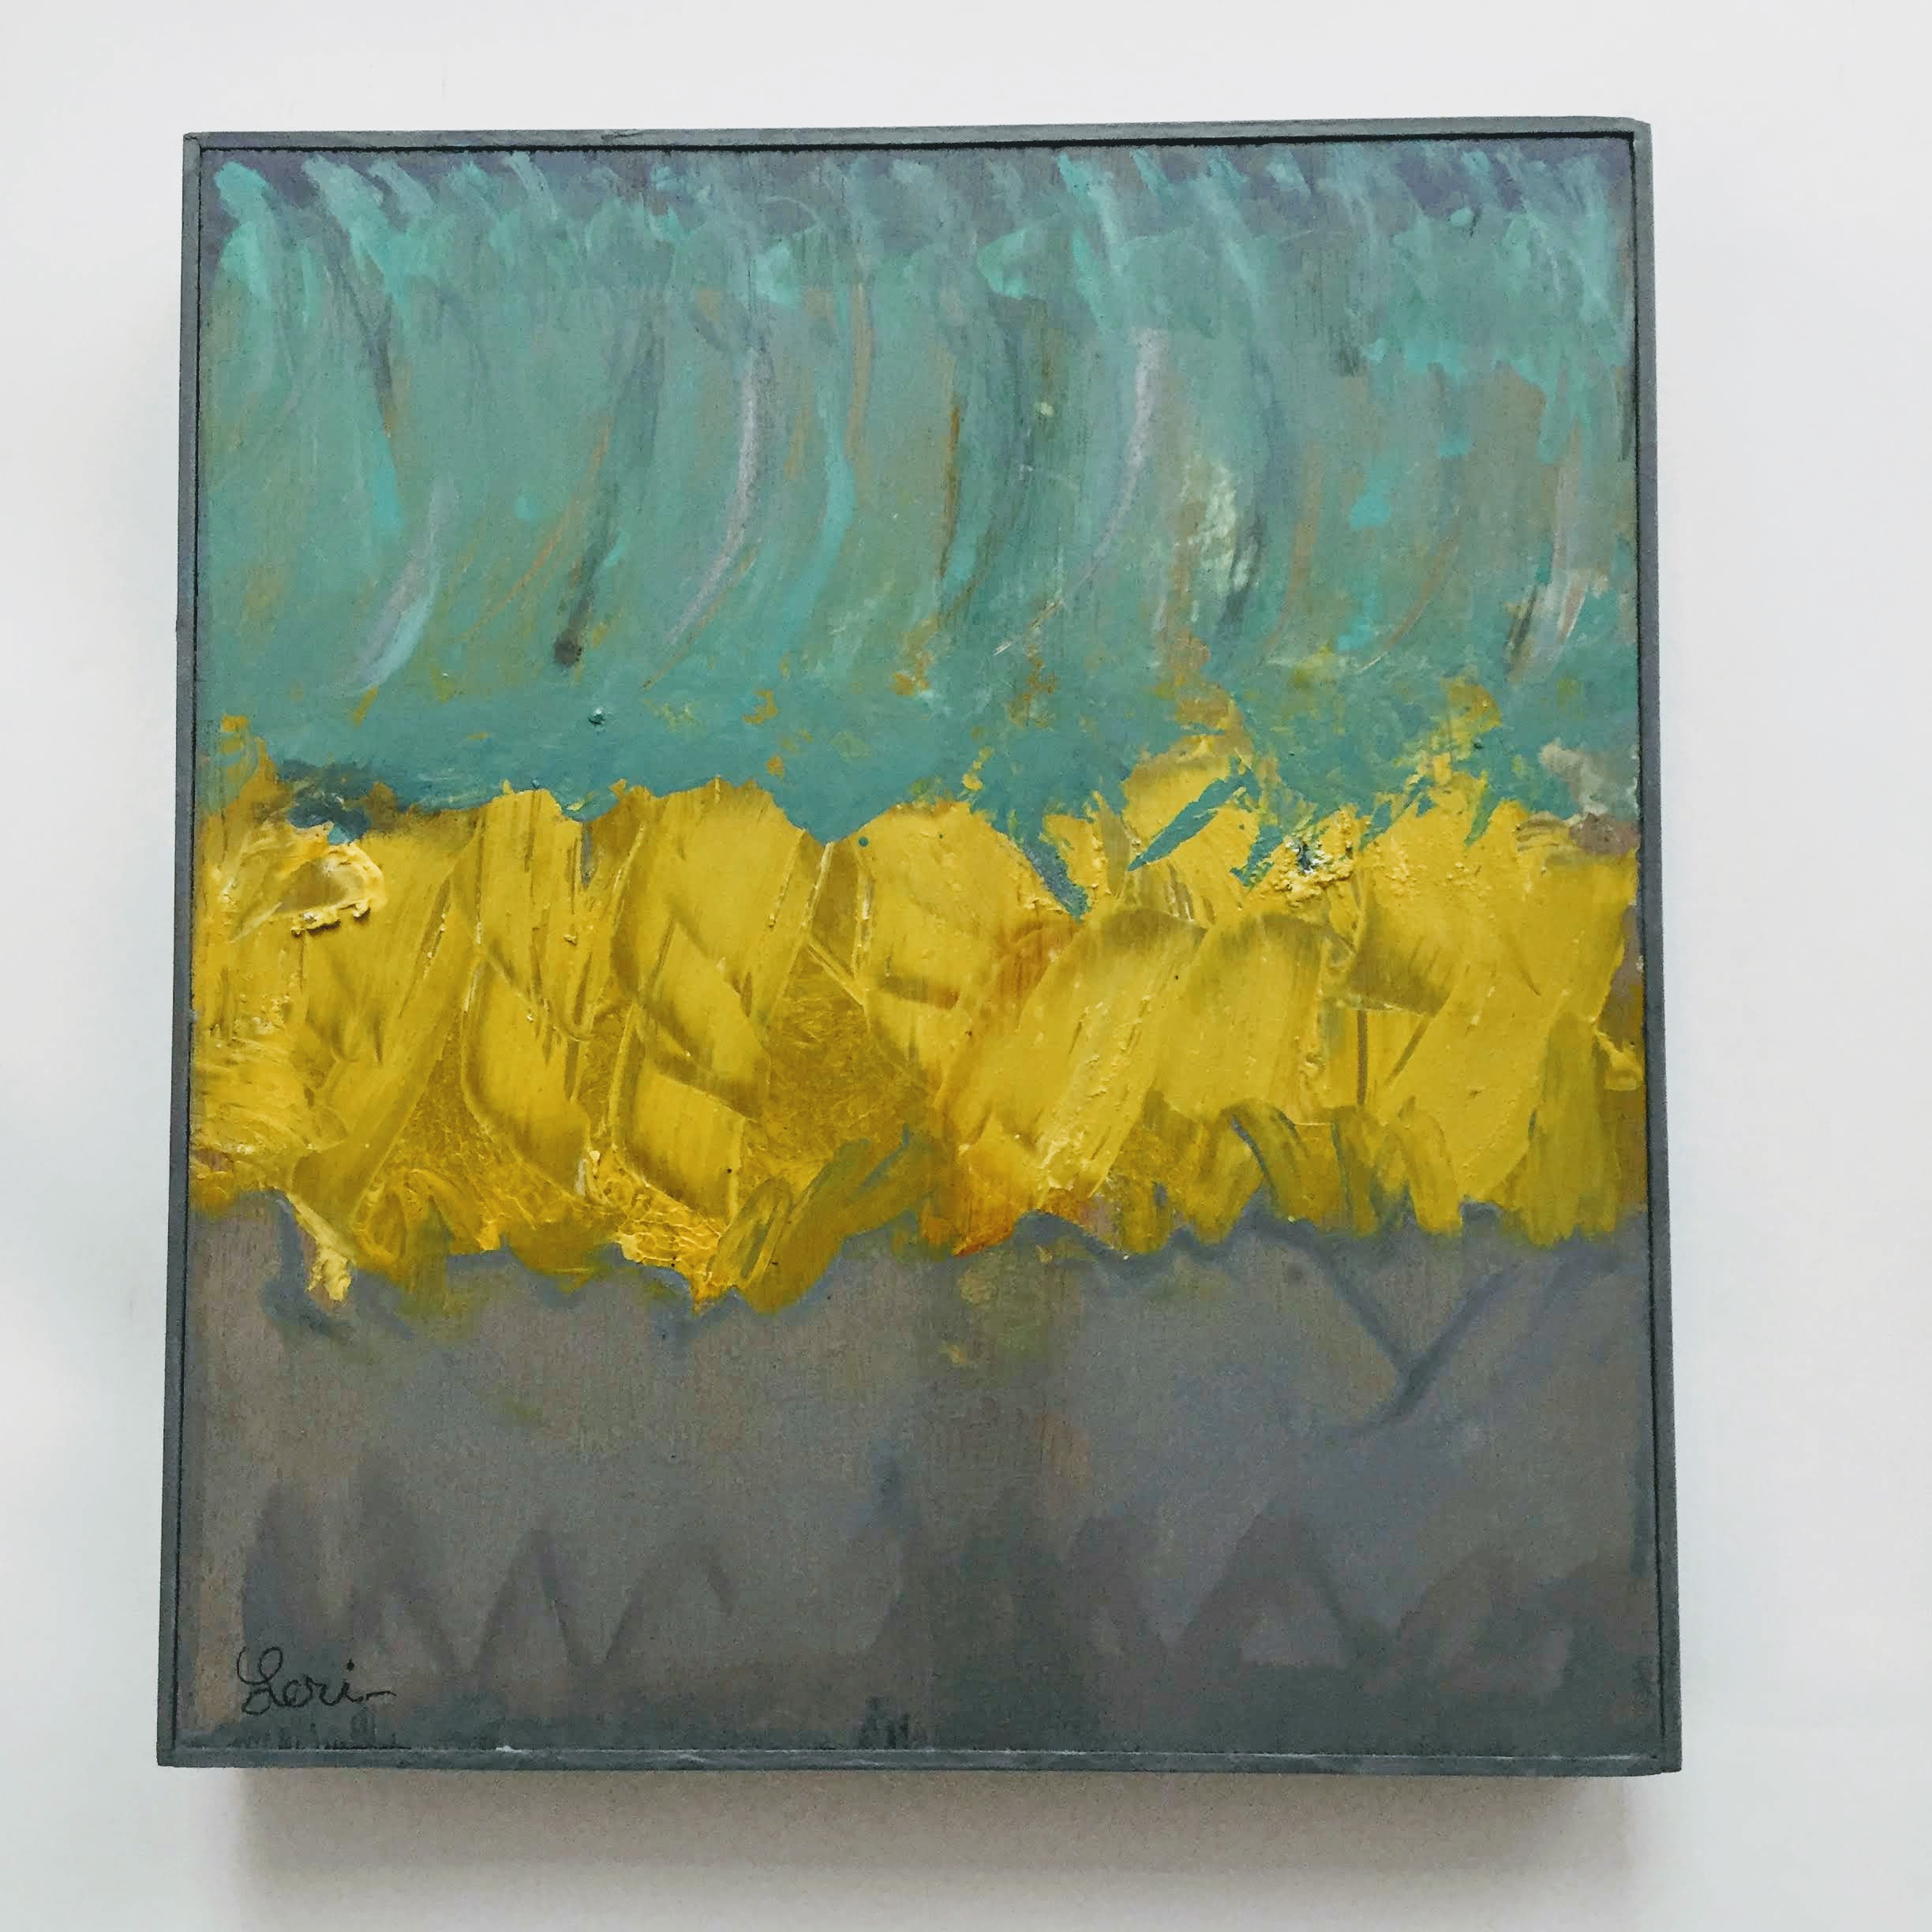 Turquoise and Yellow, 2019, acrylic paint on wood panel, 16x 14 in, $900